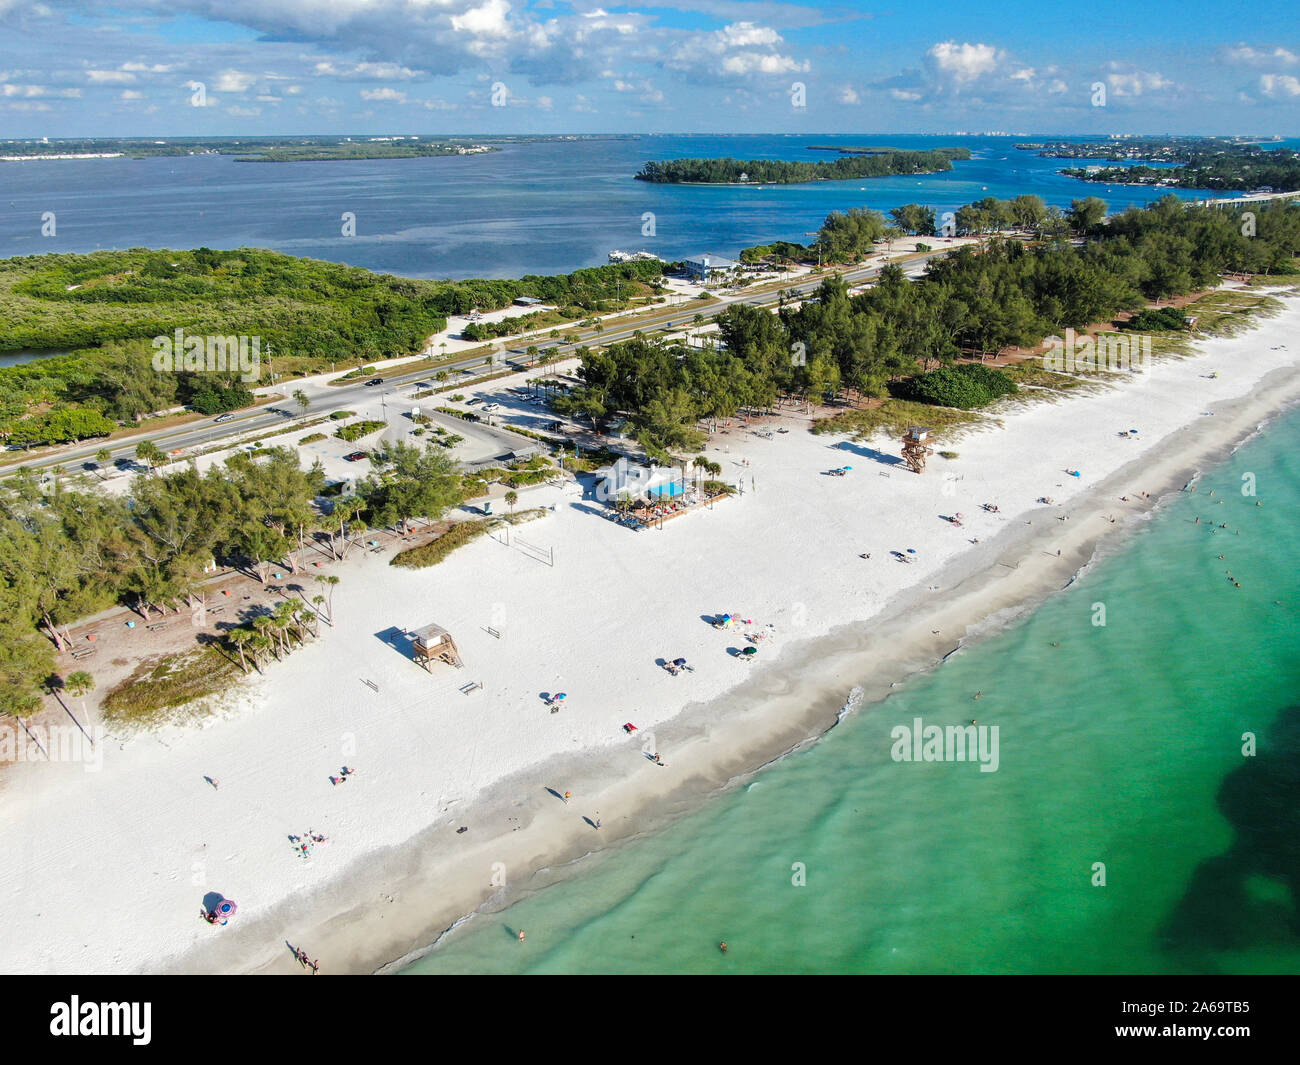 Aerial view of Anna Maria Island, white sand beaches and blue water